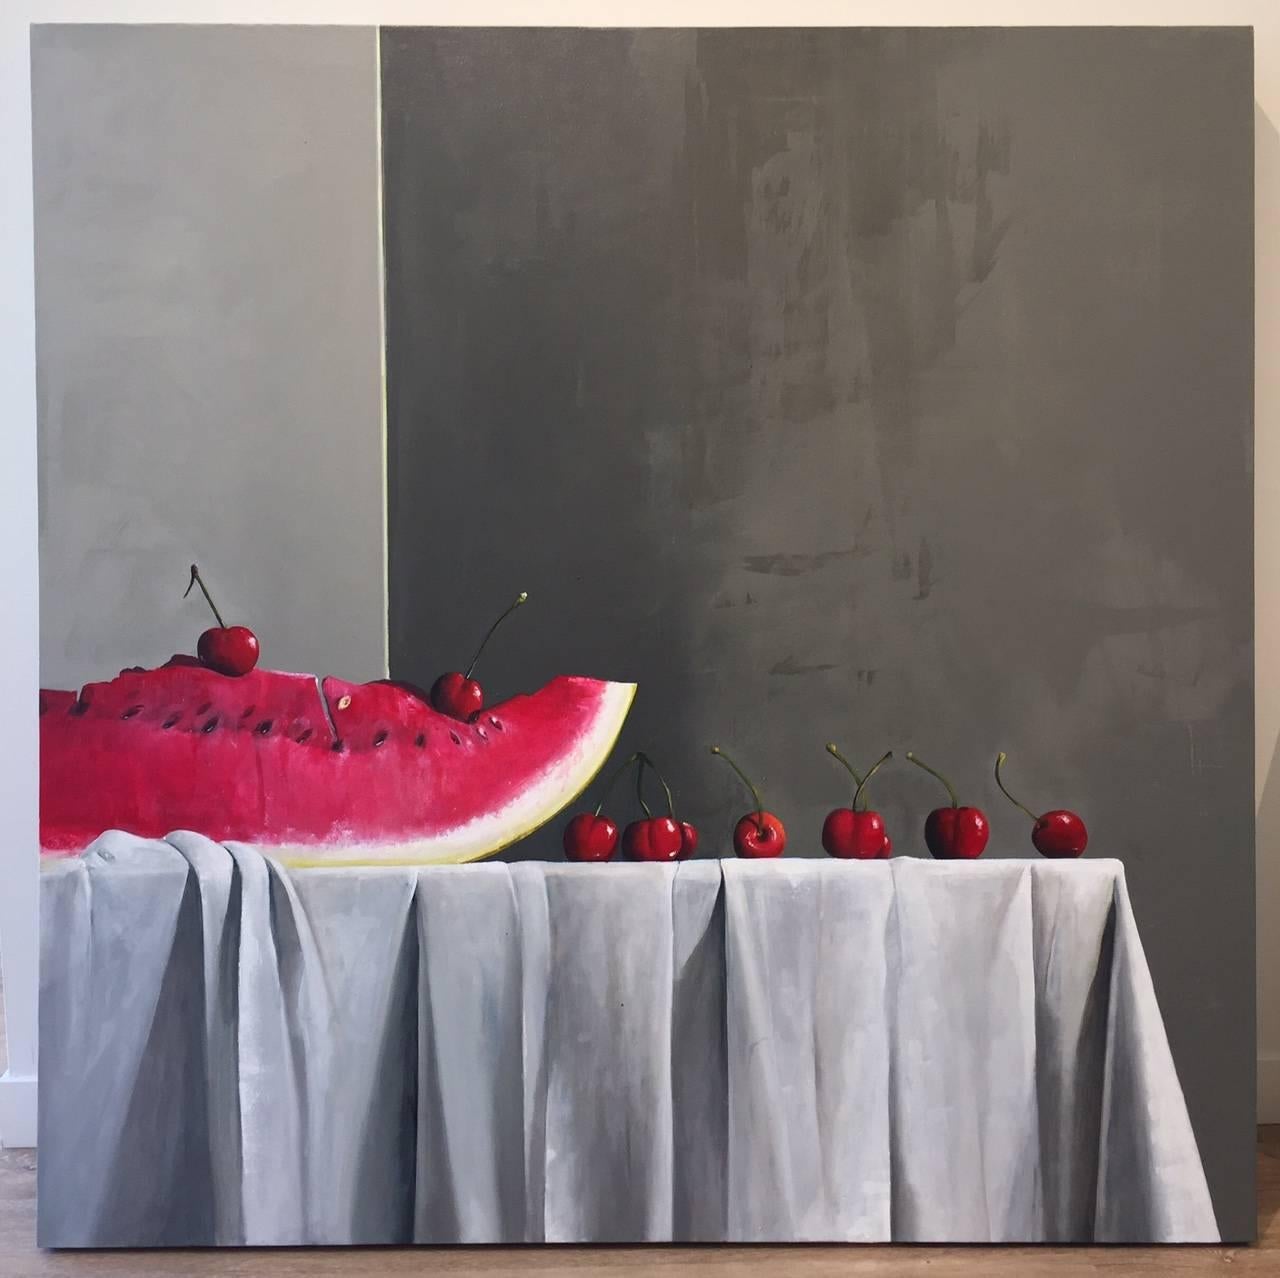 When Life is Still / watermelon and cherries - Magic Realism - Gray Still-Life Painting by Stephen Namara